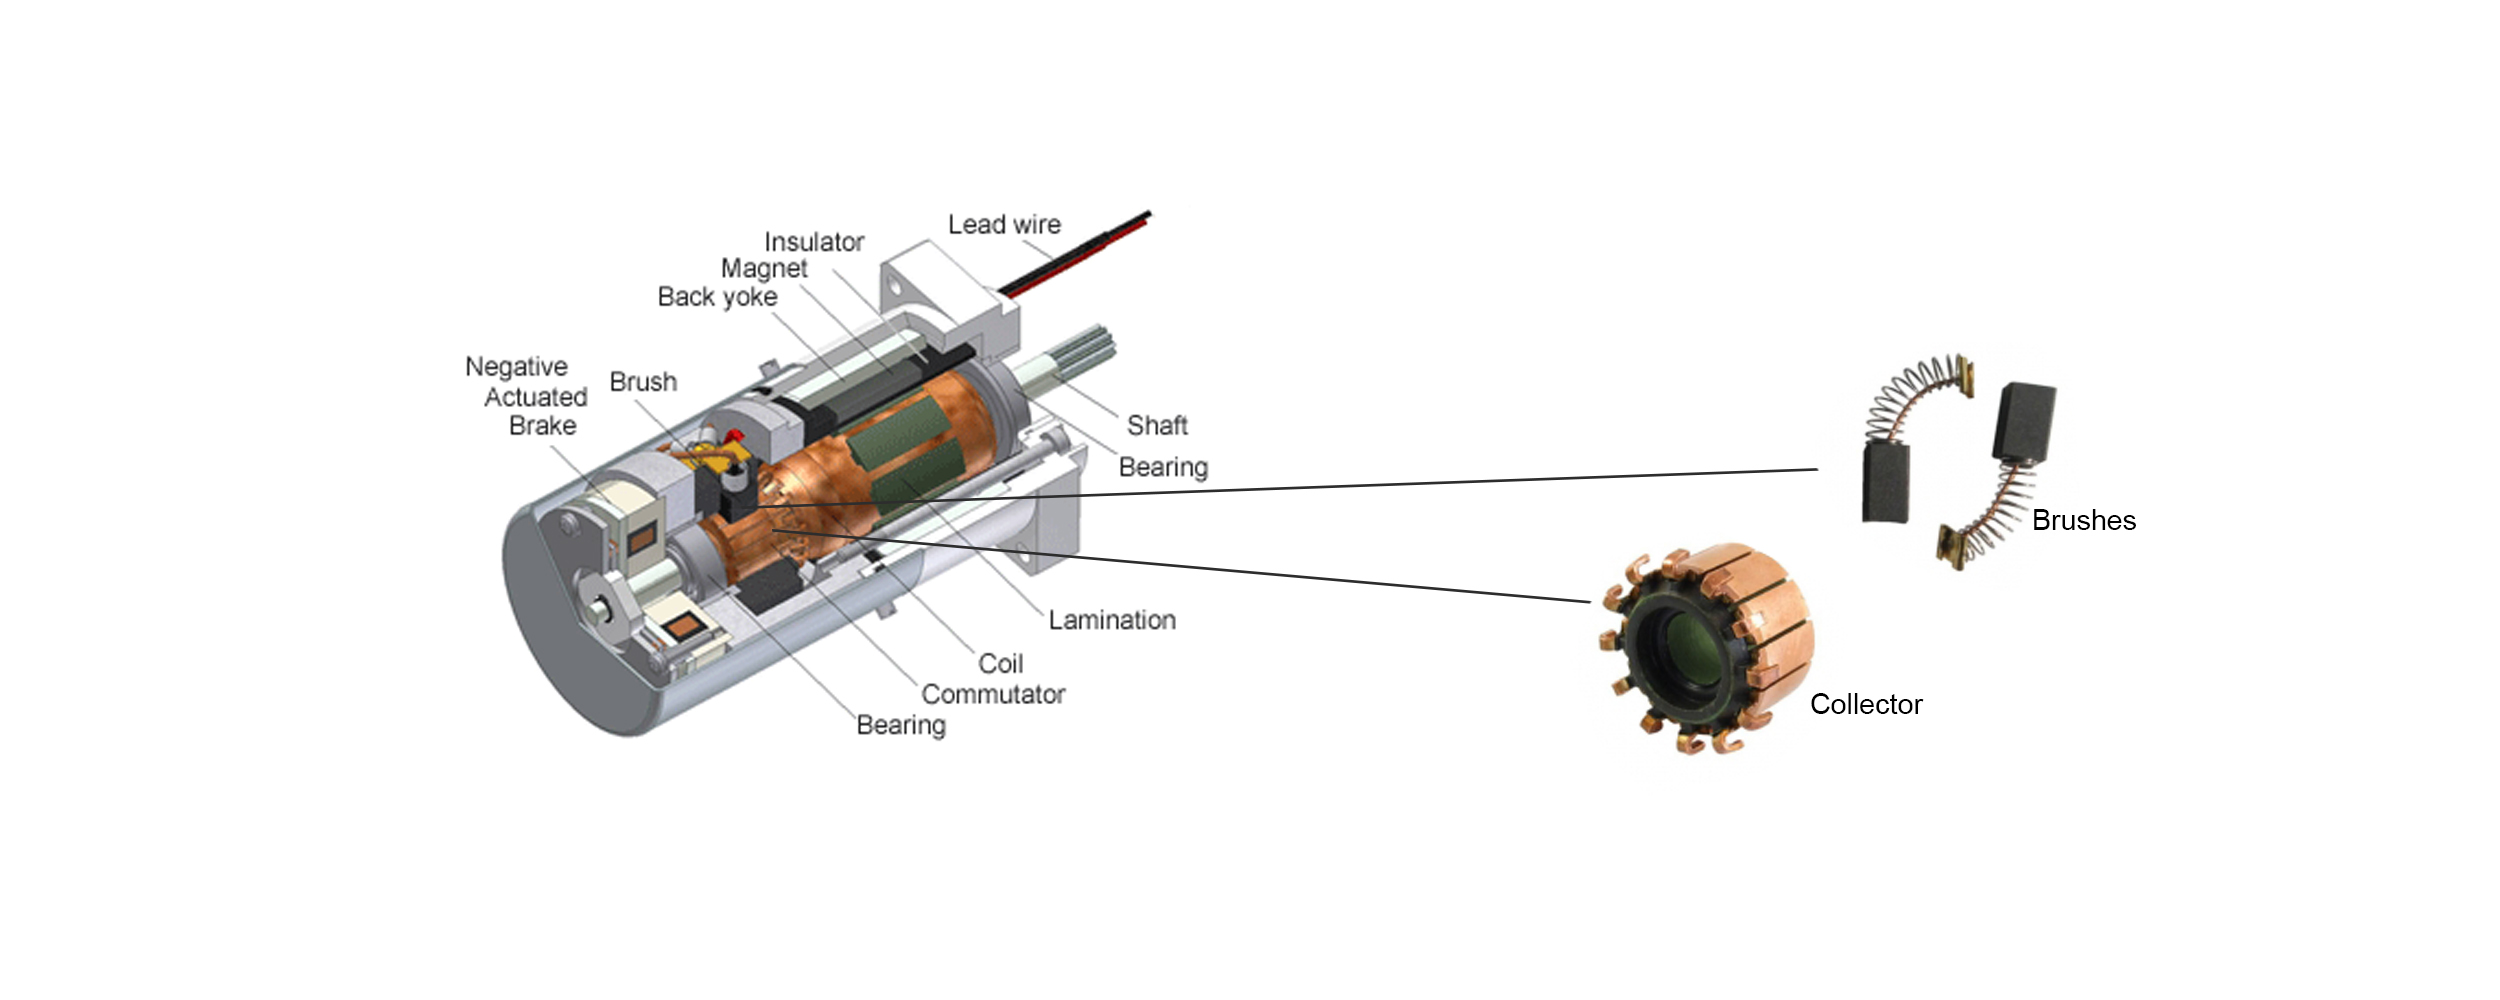 Brushless Servo Motors and Brushed Motors: Which to Choose